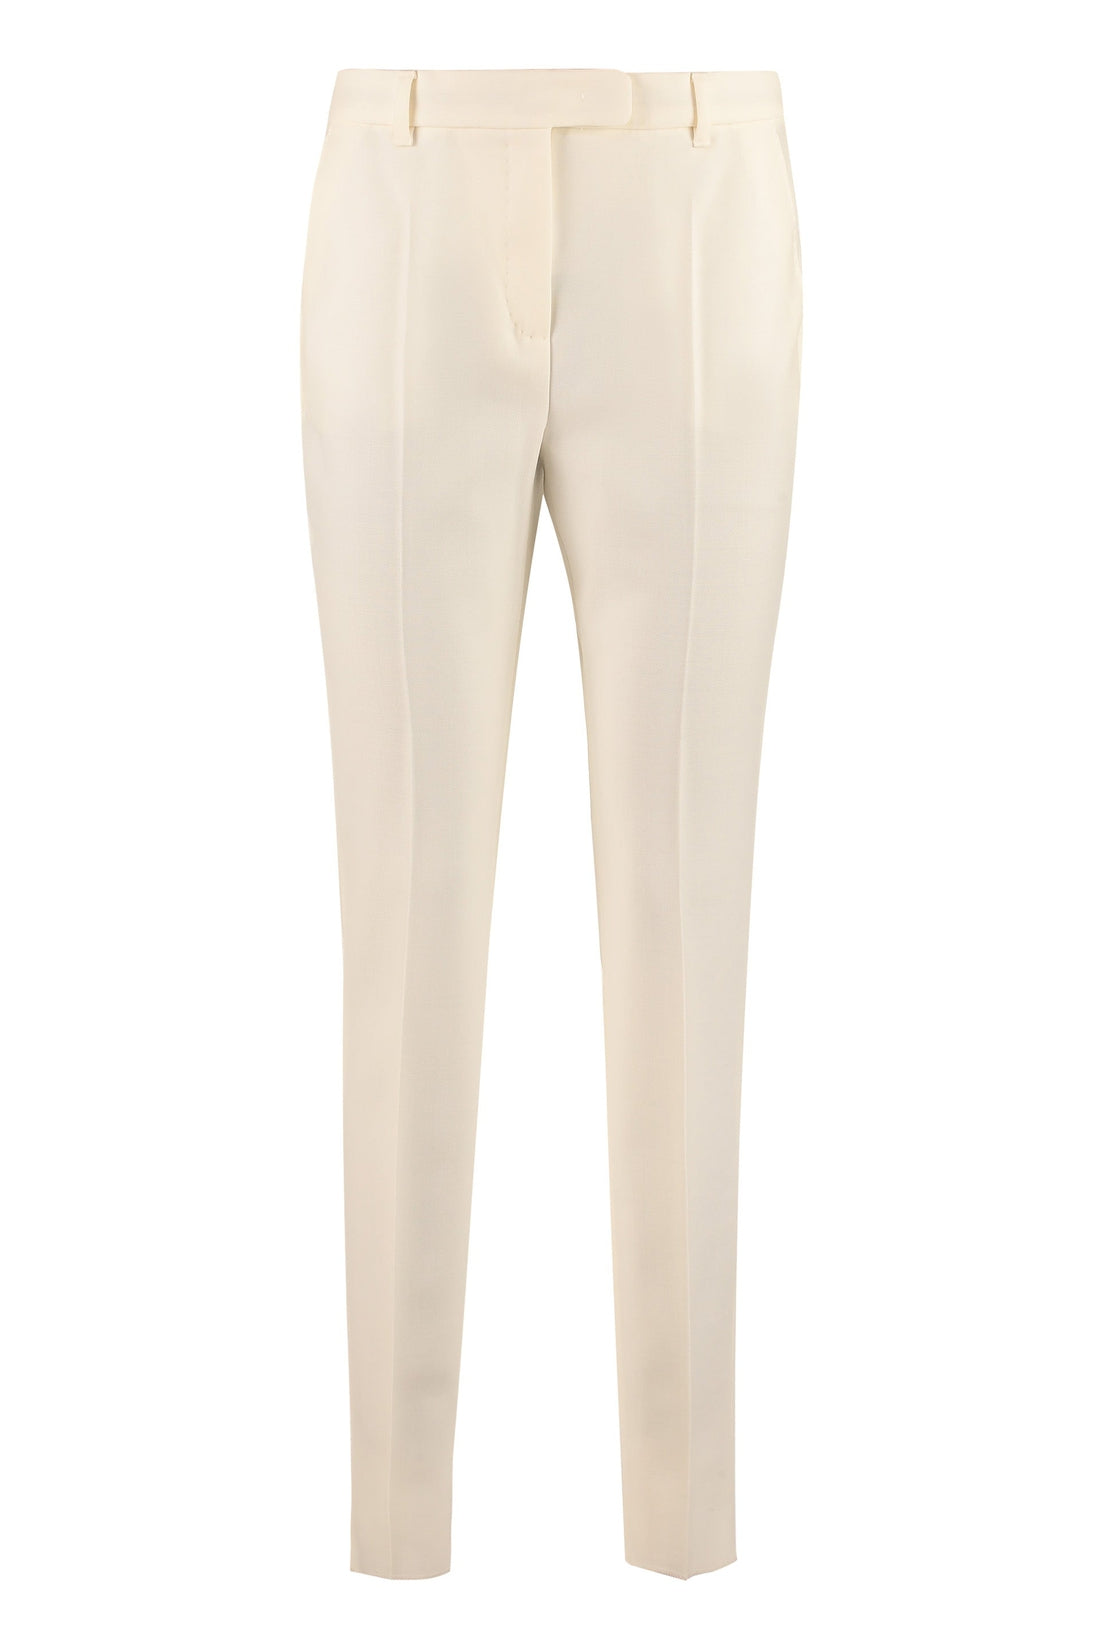 Max Mara-OUTLET-SALE-Alma wool tailored trousers-ARCHIVIST